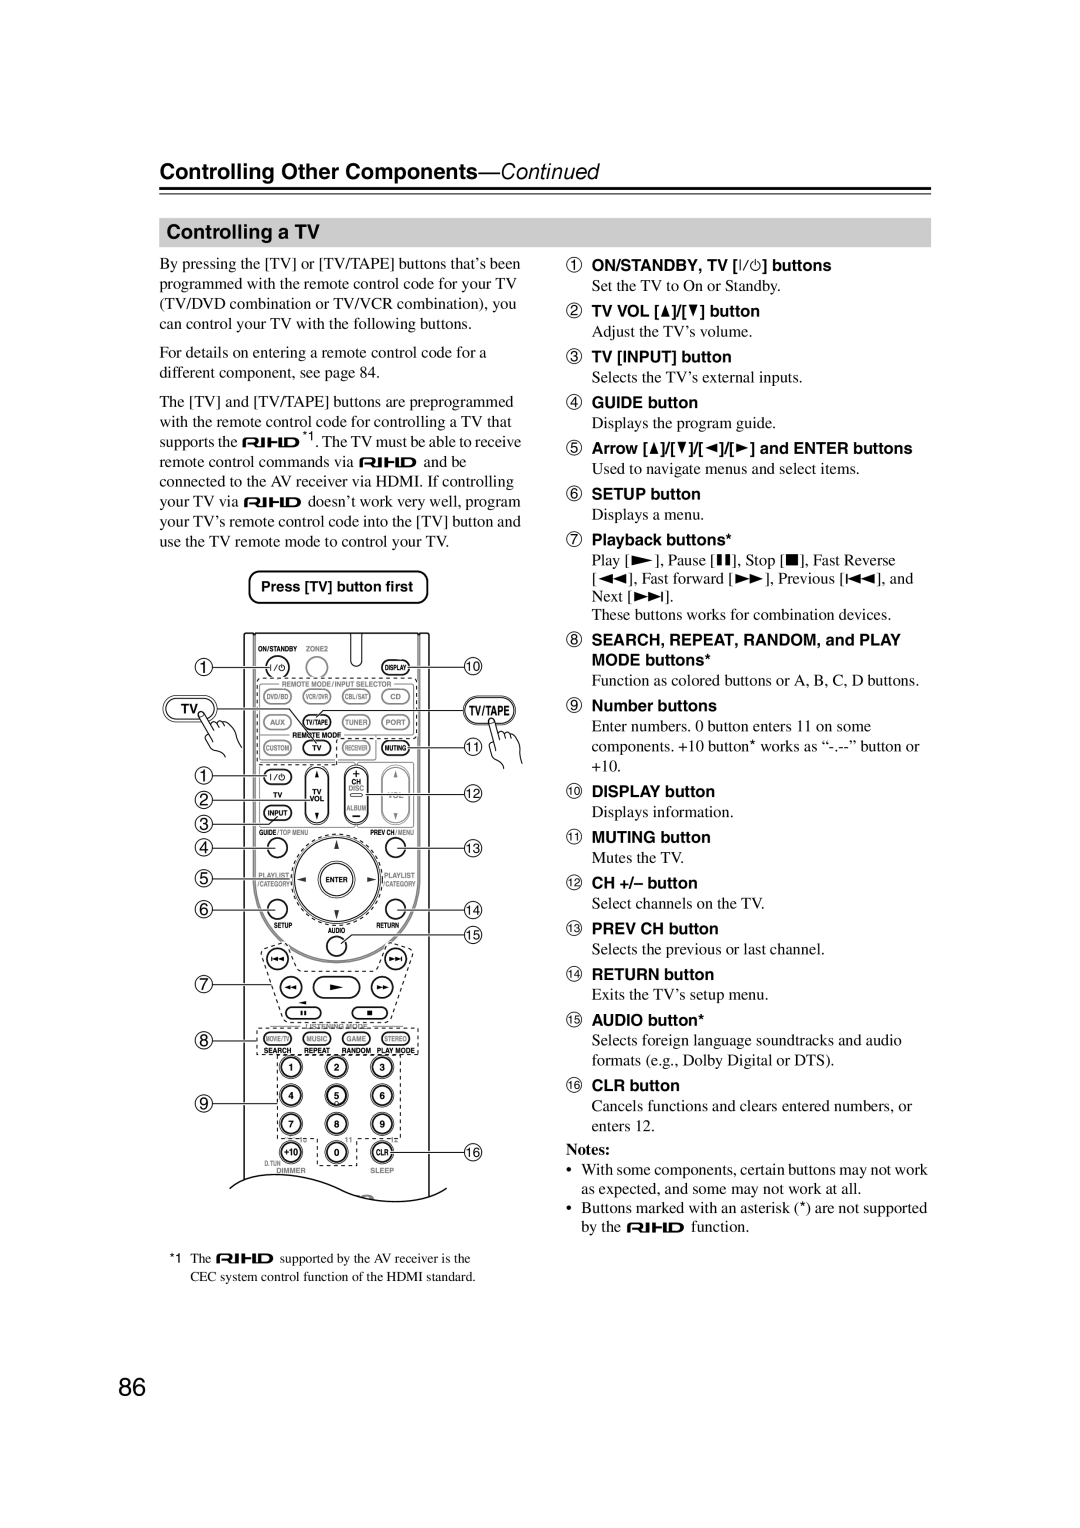 Onkyo TX-SR577, SR507 instruction manual Controlling a TV, Controlling Other Components—Continued 